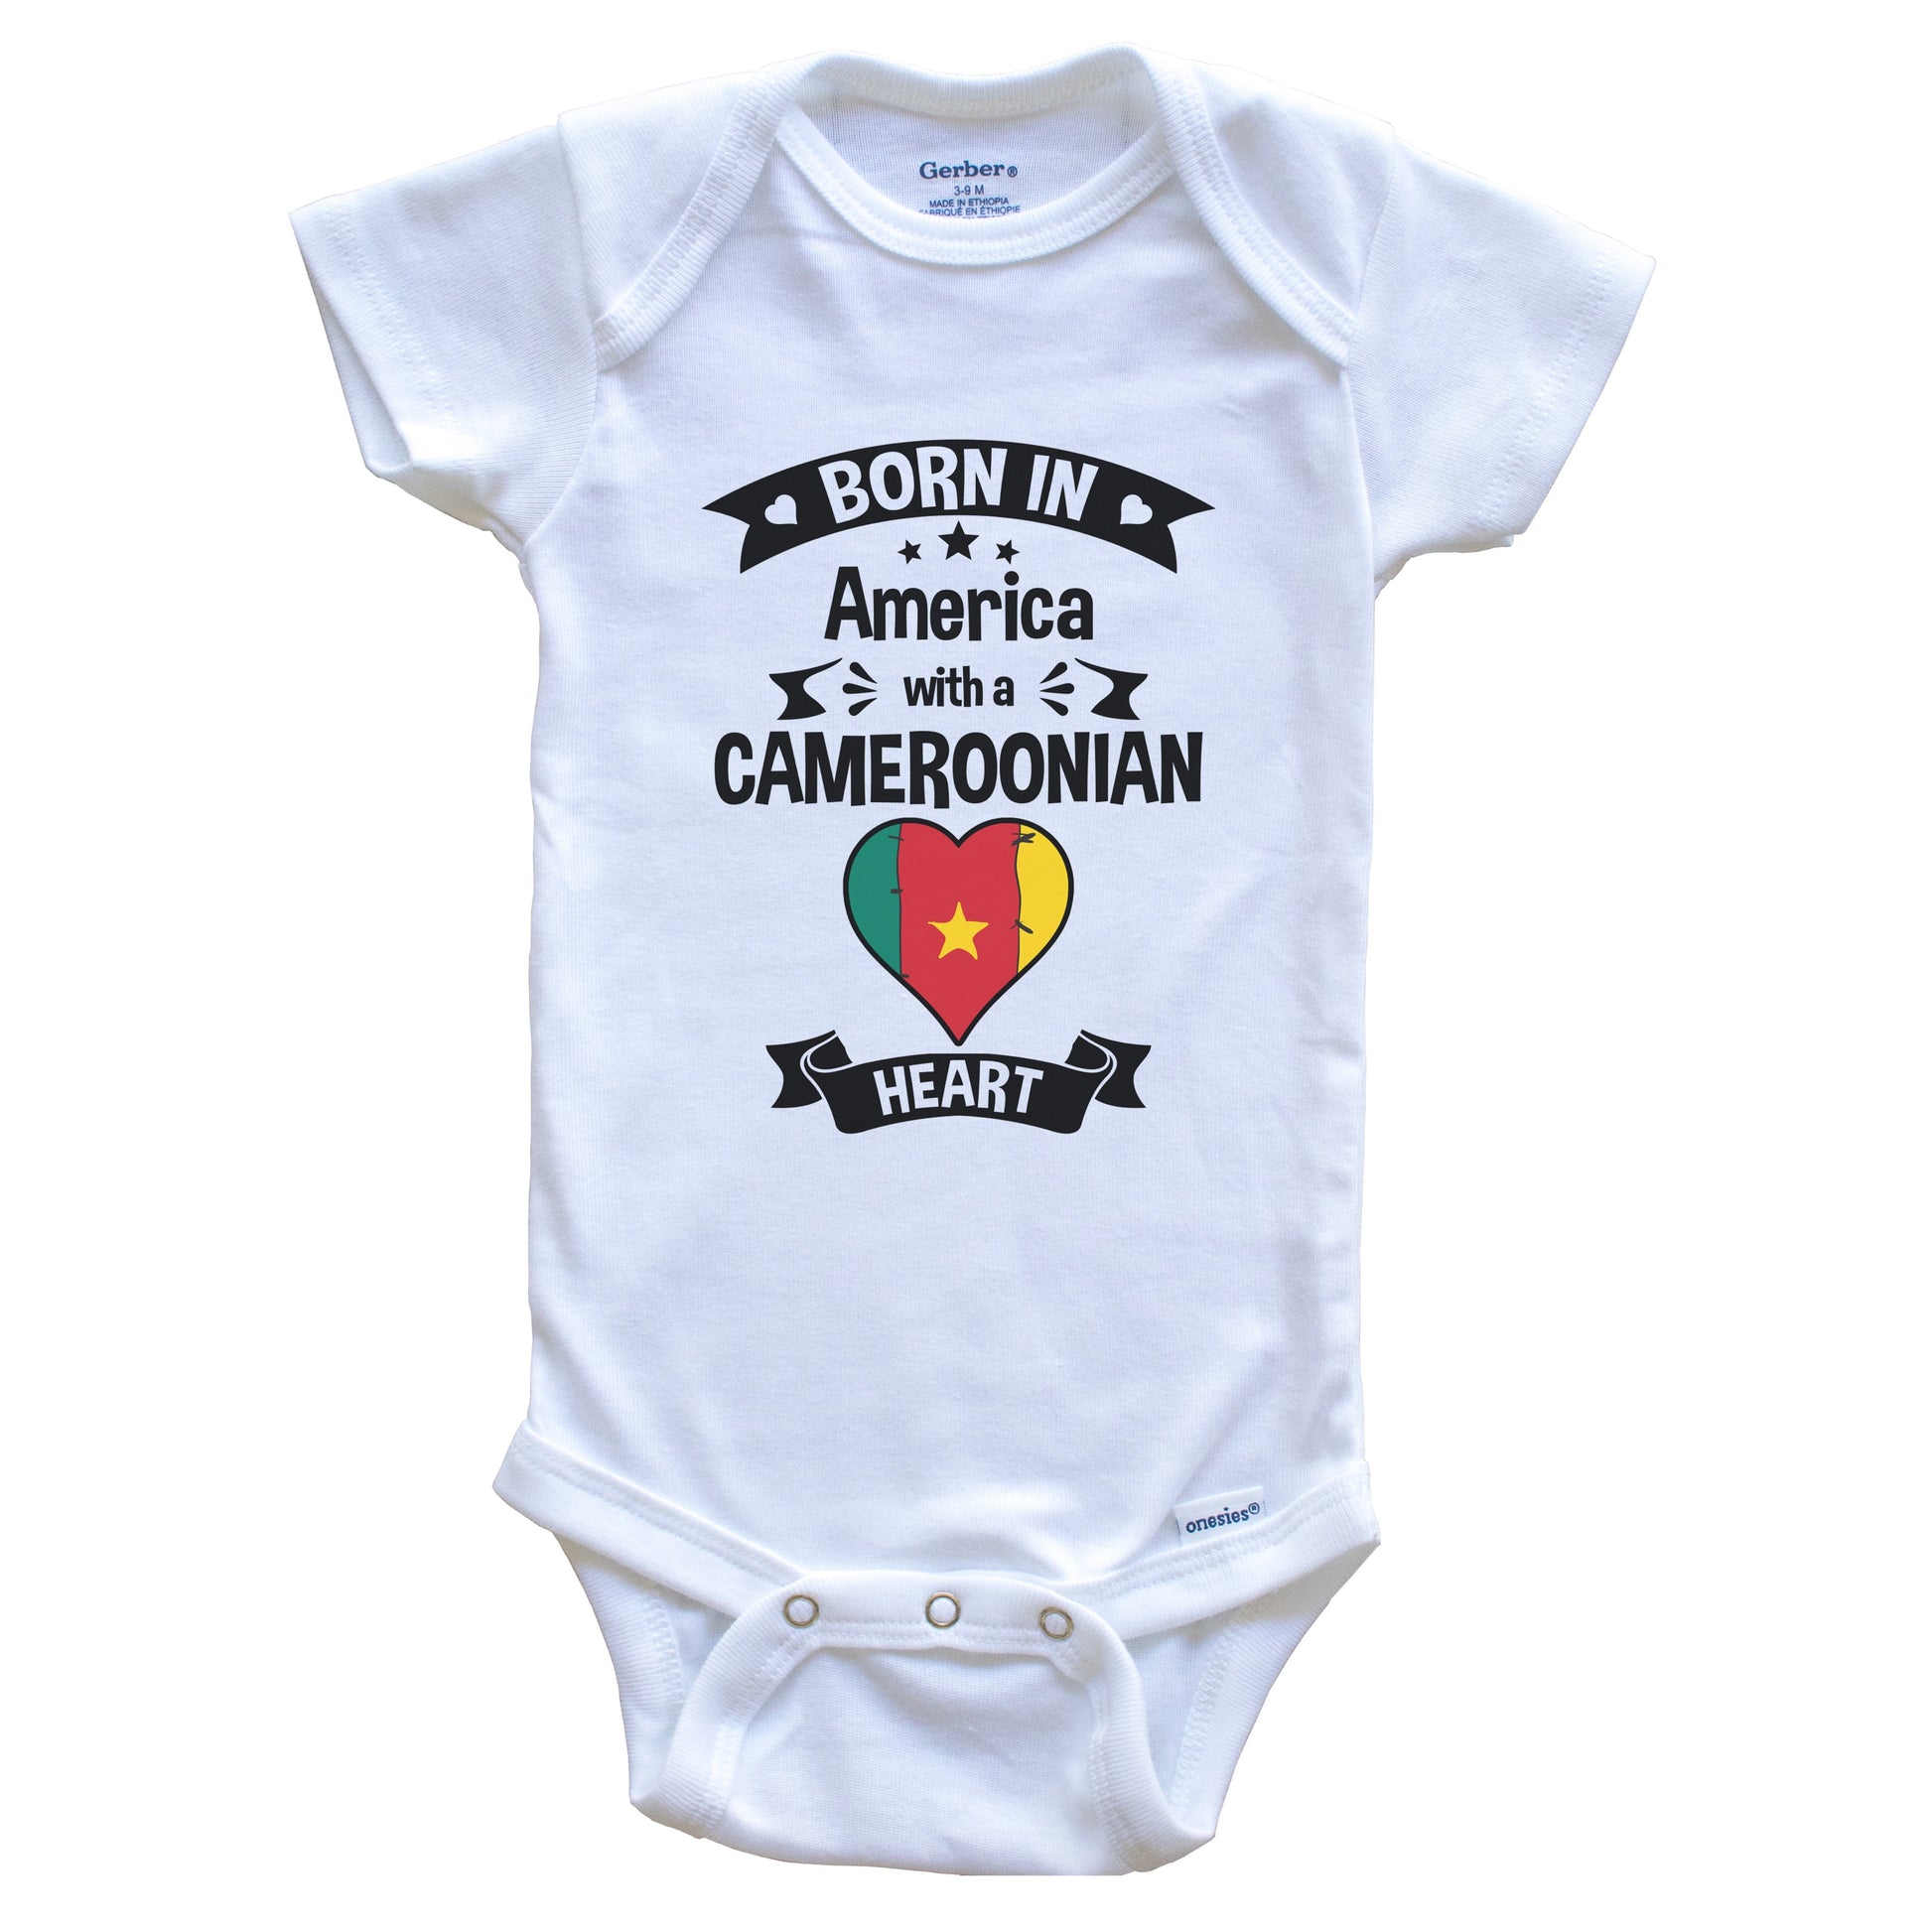 Born In America With A Cameroonian Heart Baby Onesie